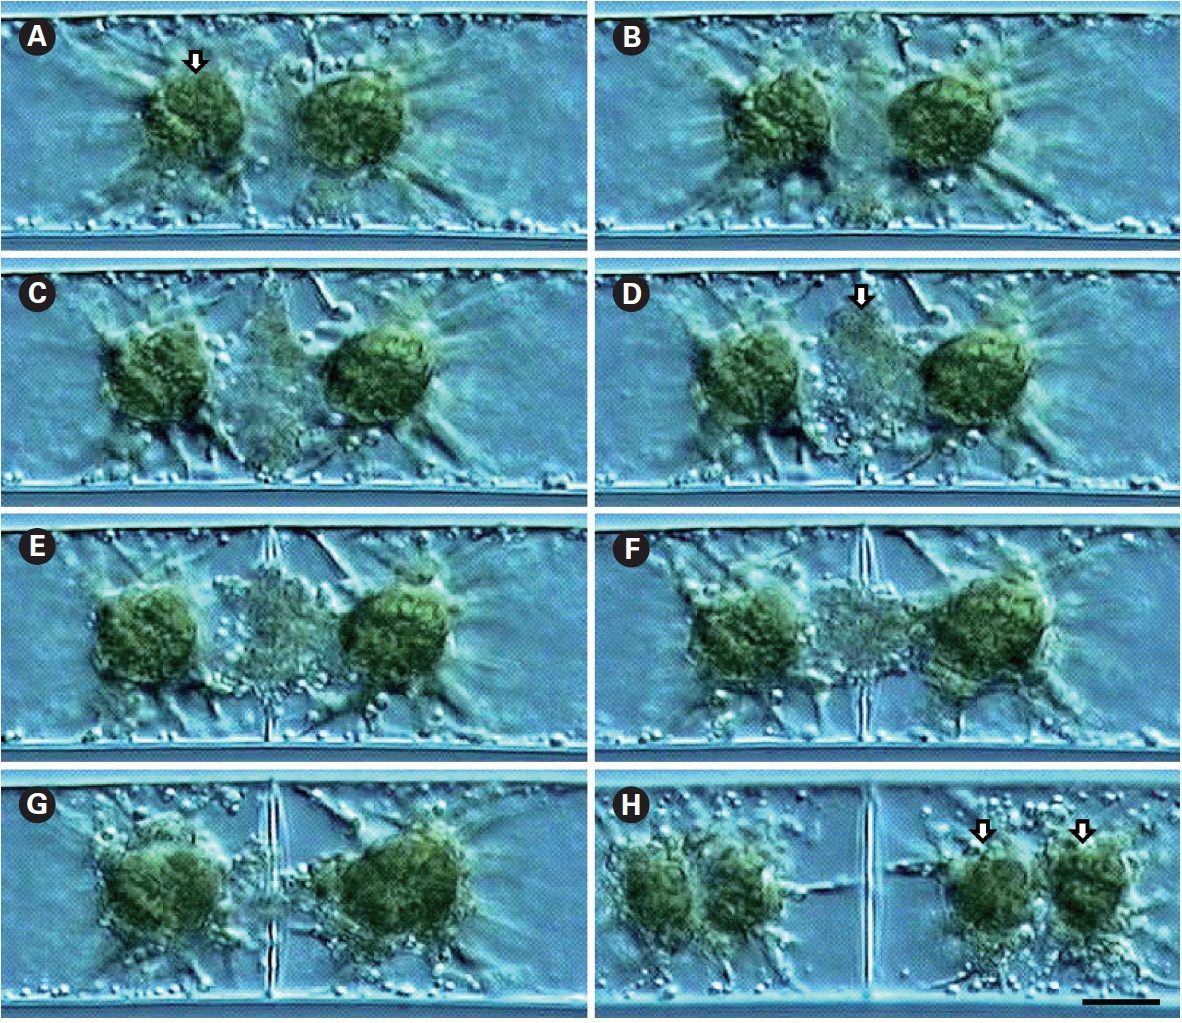 Time-lapse images of cell division process in Zygnema cruciatum. (A) Beginning of cell wall formation. Arrow shows the nucleus between chloroplasts. (B) Two stellate chloroplasts associated with the nucleus and the peripheral protoplasm. (C) Formation of vesicles at the center of cell. (D) New cell wall begins to develop. Arrow shows phragmoplast the new cell wall and dividing chloroplasts. (E) Developing wall. (F) Developing wall with reduced number of vesicles. (G) Number of vesicles reduced abruptly. (H) Chloroplast division starts (arrows). Scale bar represents: 10 ㎛.